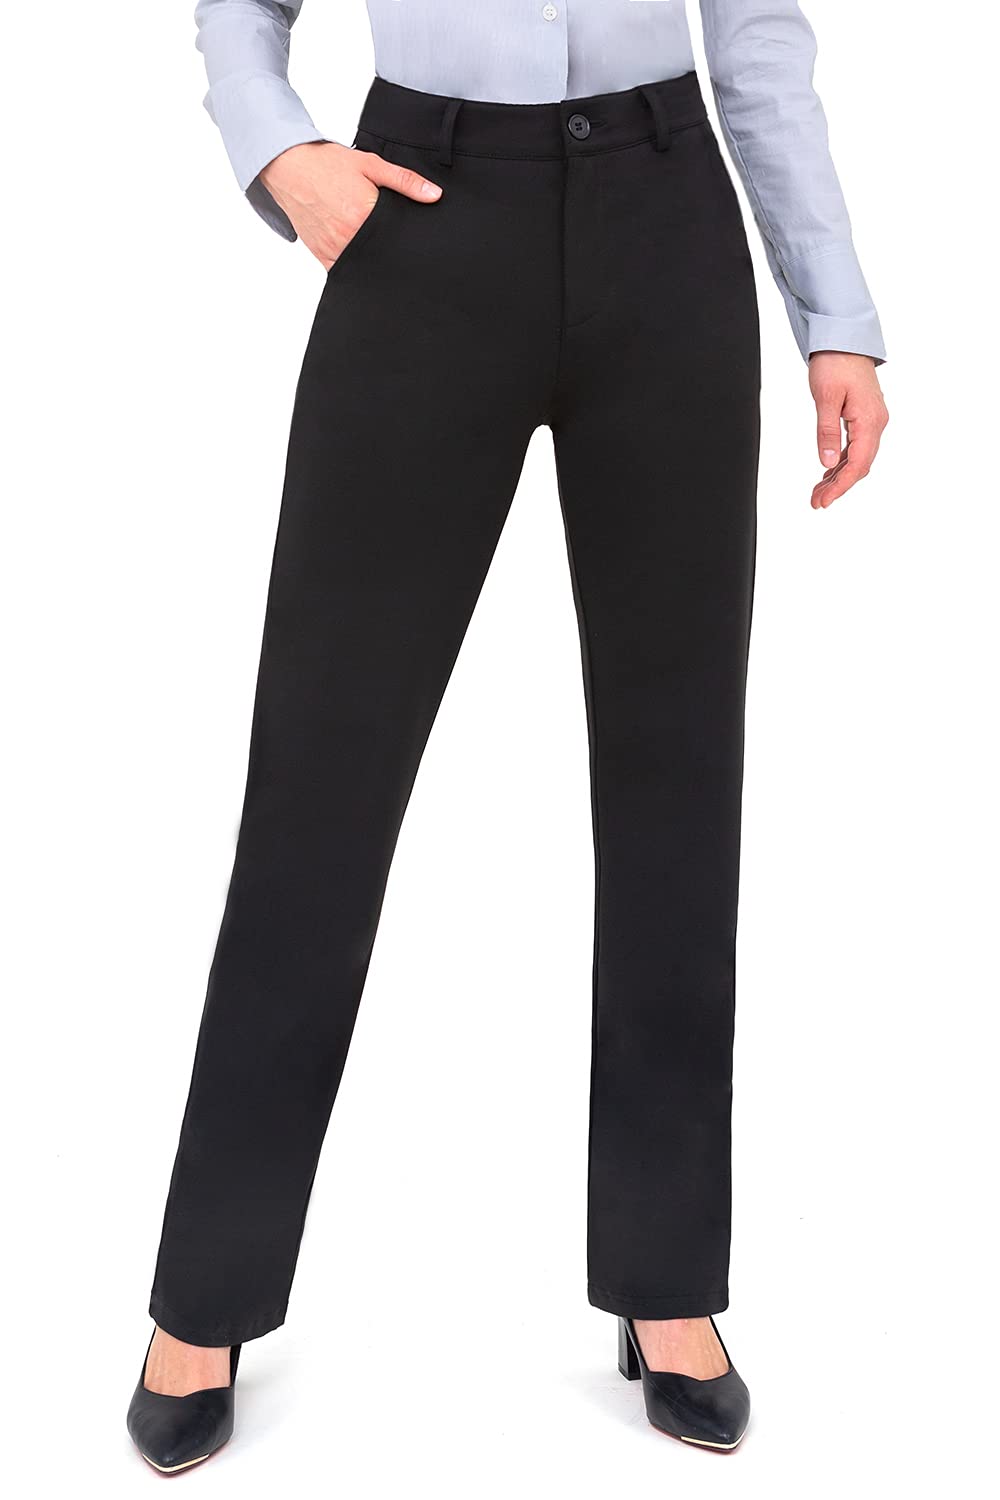 Bamans Work Pants for Women Yoga Dress Pants Straight Leg Stretch Work Pant with Pockets (Black, Small)